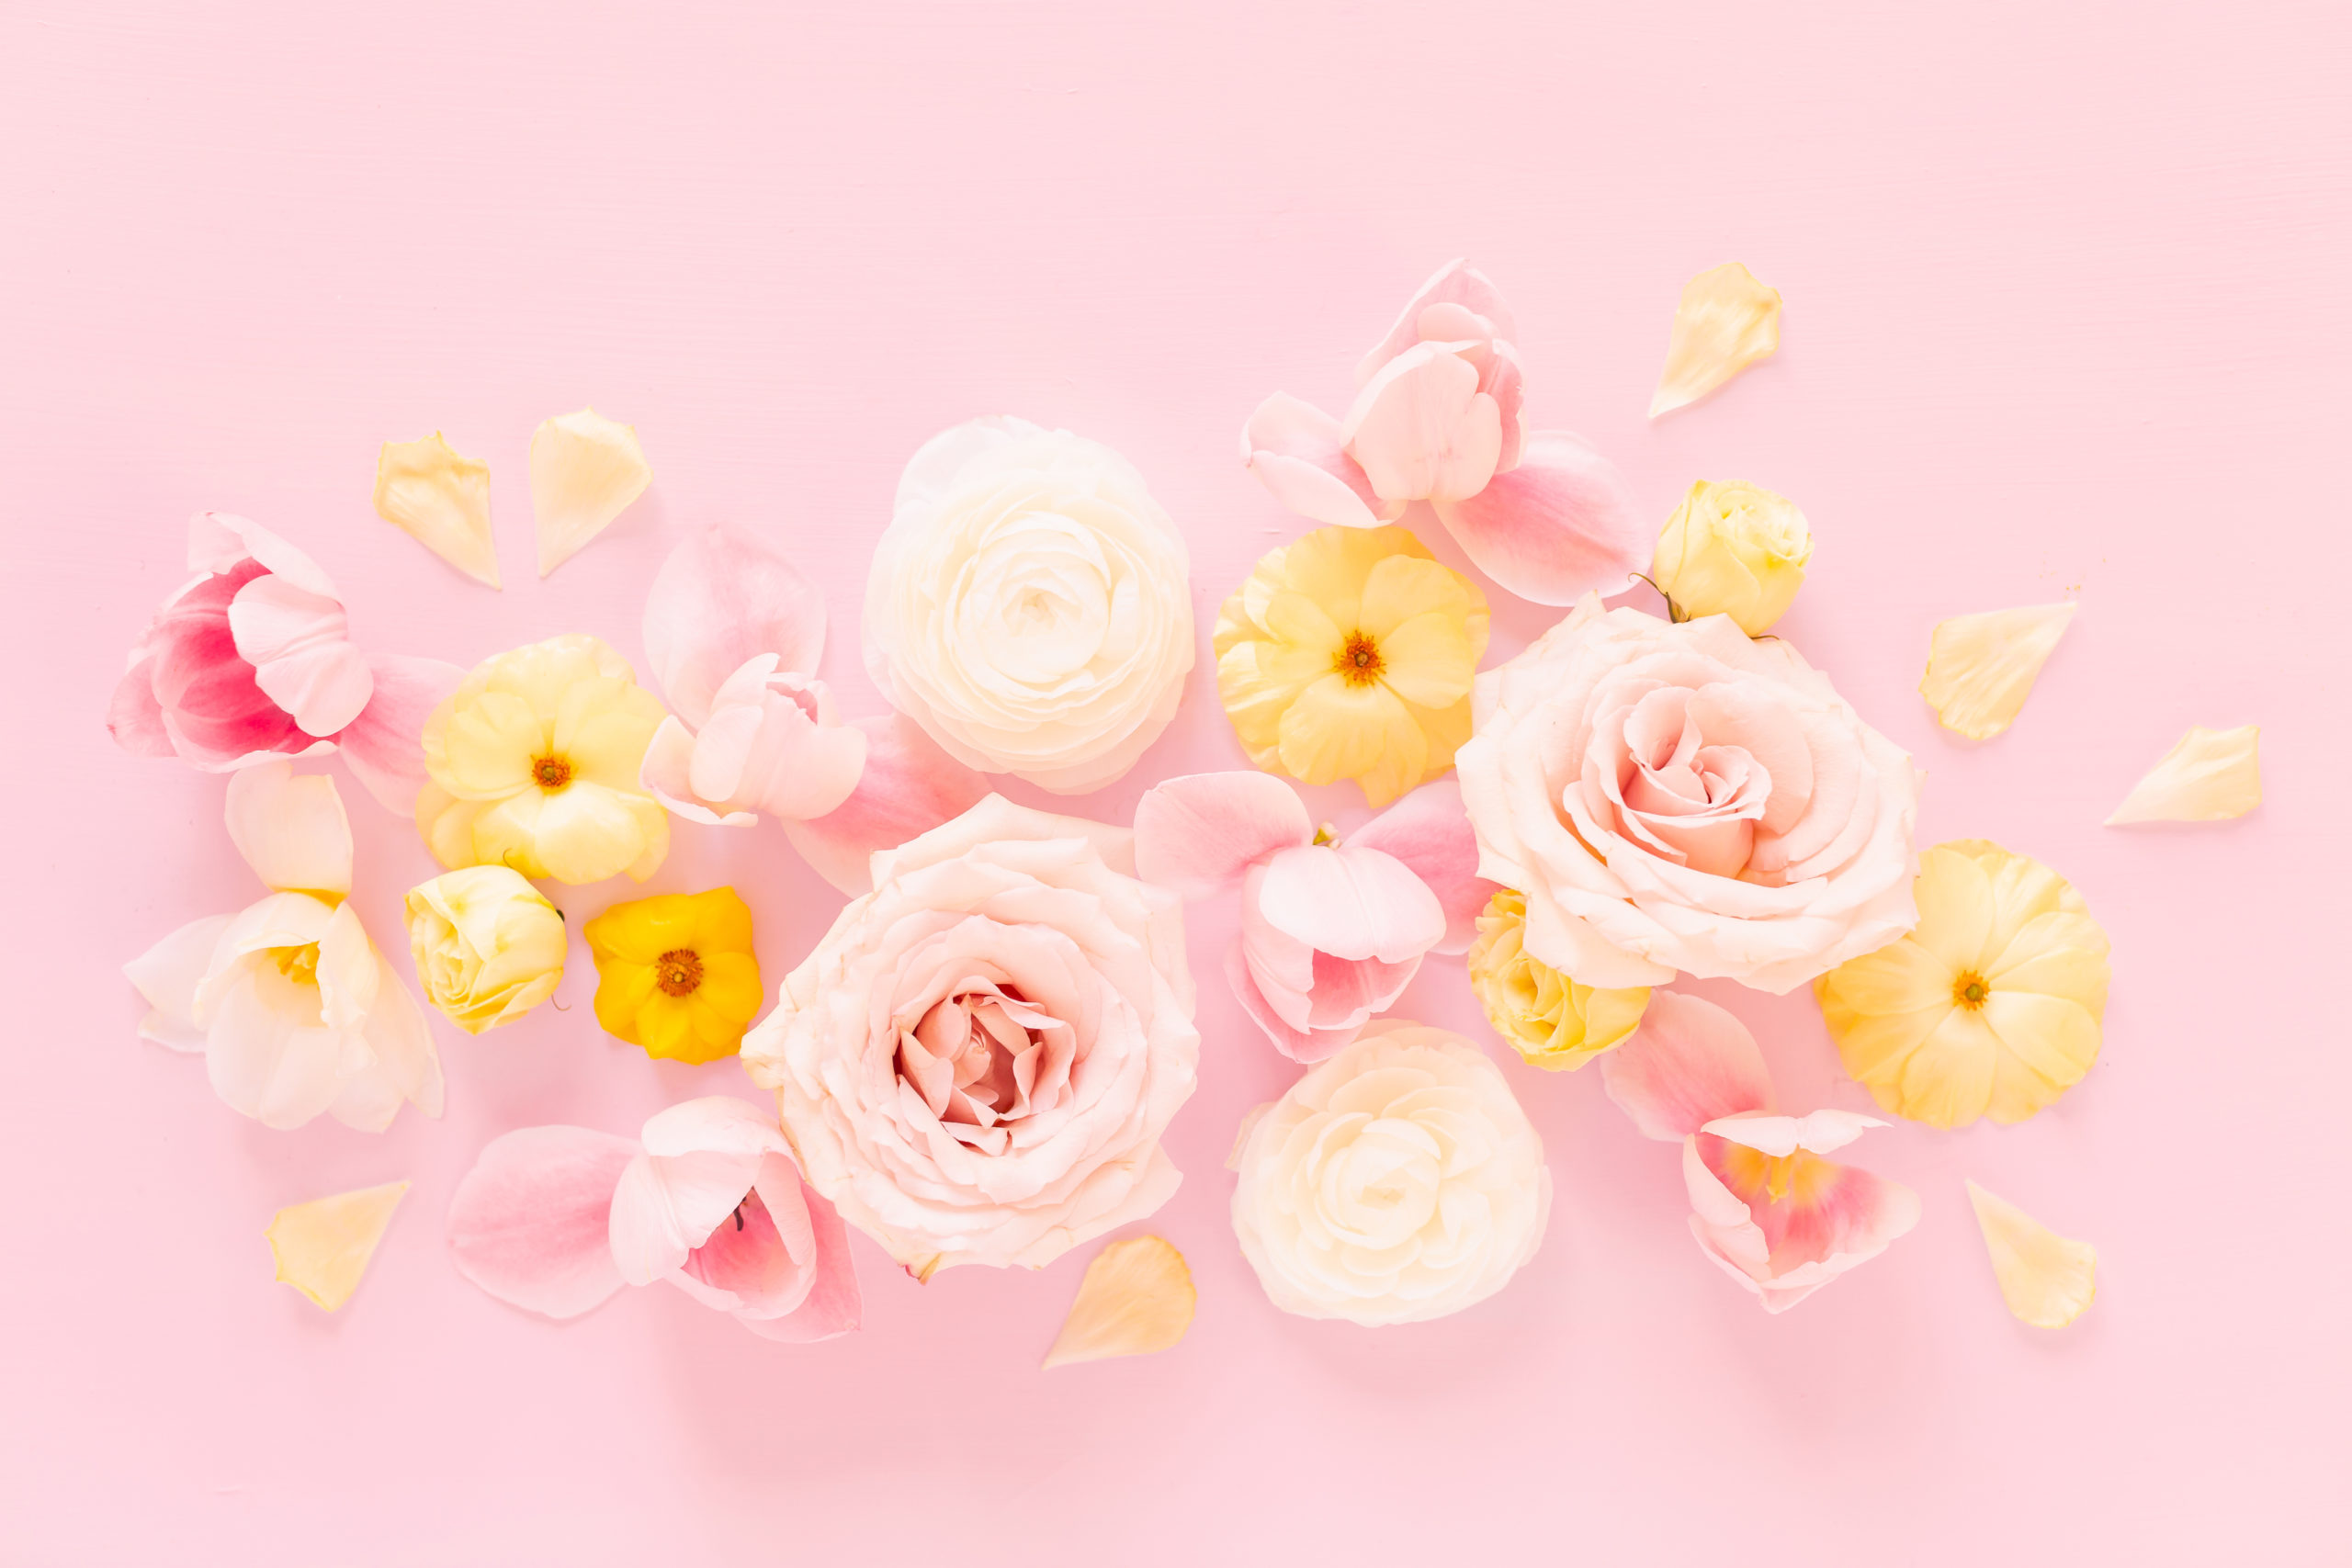 DIGITAL BLOOMS AUGUST 2020 | FREE DESKTOP WALLPAPER | A soft, feminine, pastel floral FREE Desktop Wallpaper for Summer 2020 | Pastel Pink, Lavender and Yellow Floral Tech Wallpaper for Summer | Free August Flower Tech Wallpapers | JustineCelina Summer 2020 Digital Blooms | Free Floral Desktop Wallpaper featuring White Ranunculus and Yellow Butterfly Ranunculus, refurled Blush and White Tulips and Quicksand Roses | Rose Free Tech Wallpaper | Cheerful Summer Flower Tech Wallpaper // JustineCelina.com